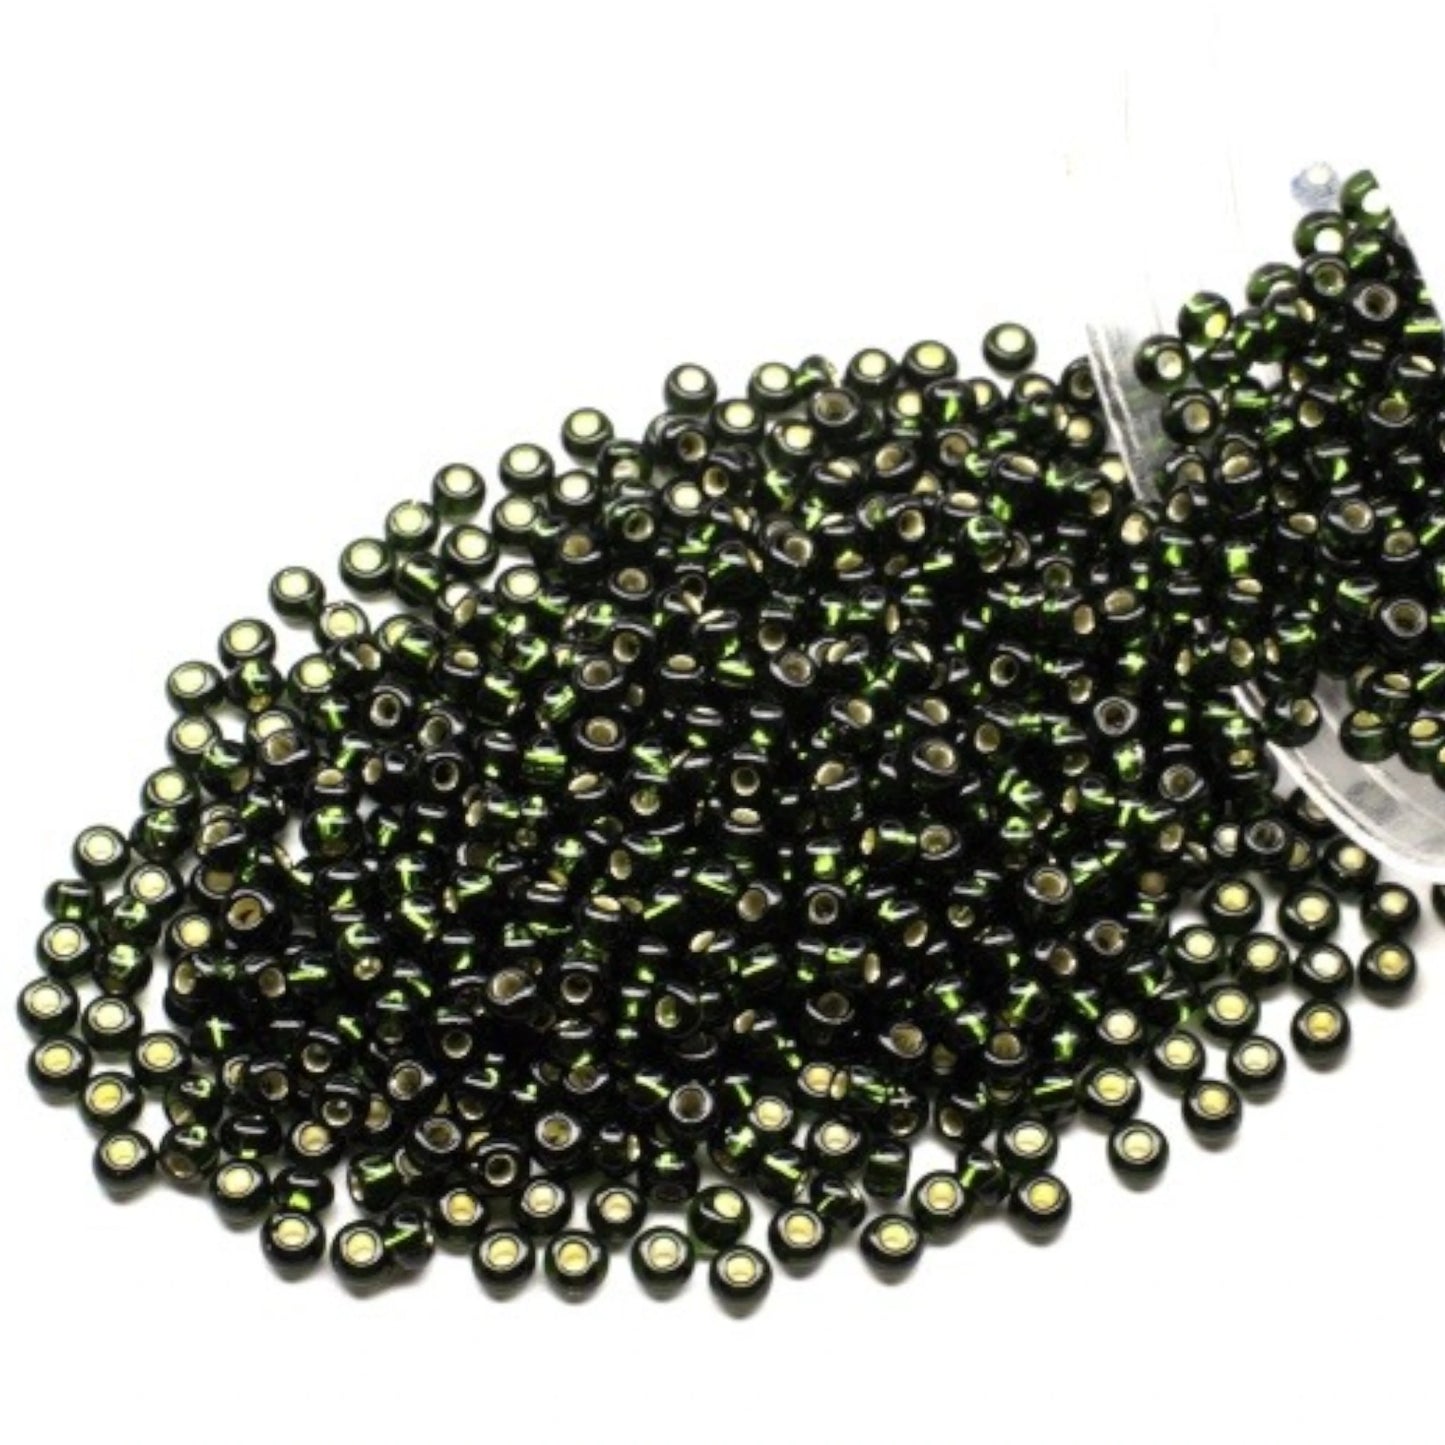 10/0 57290 Preciosa Seed Beads. Green transparent Silver lined.